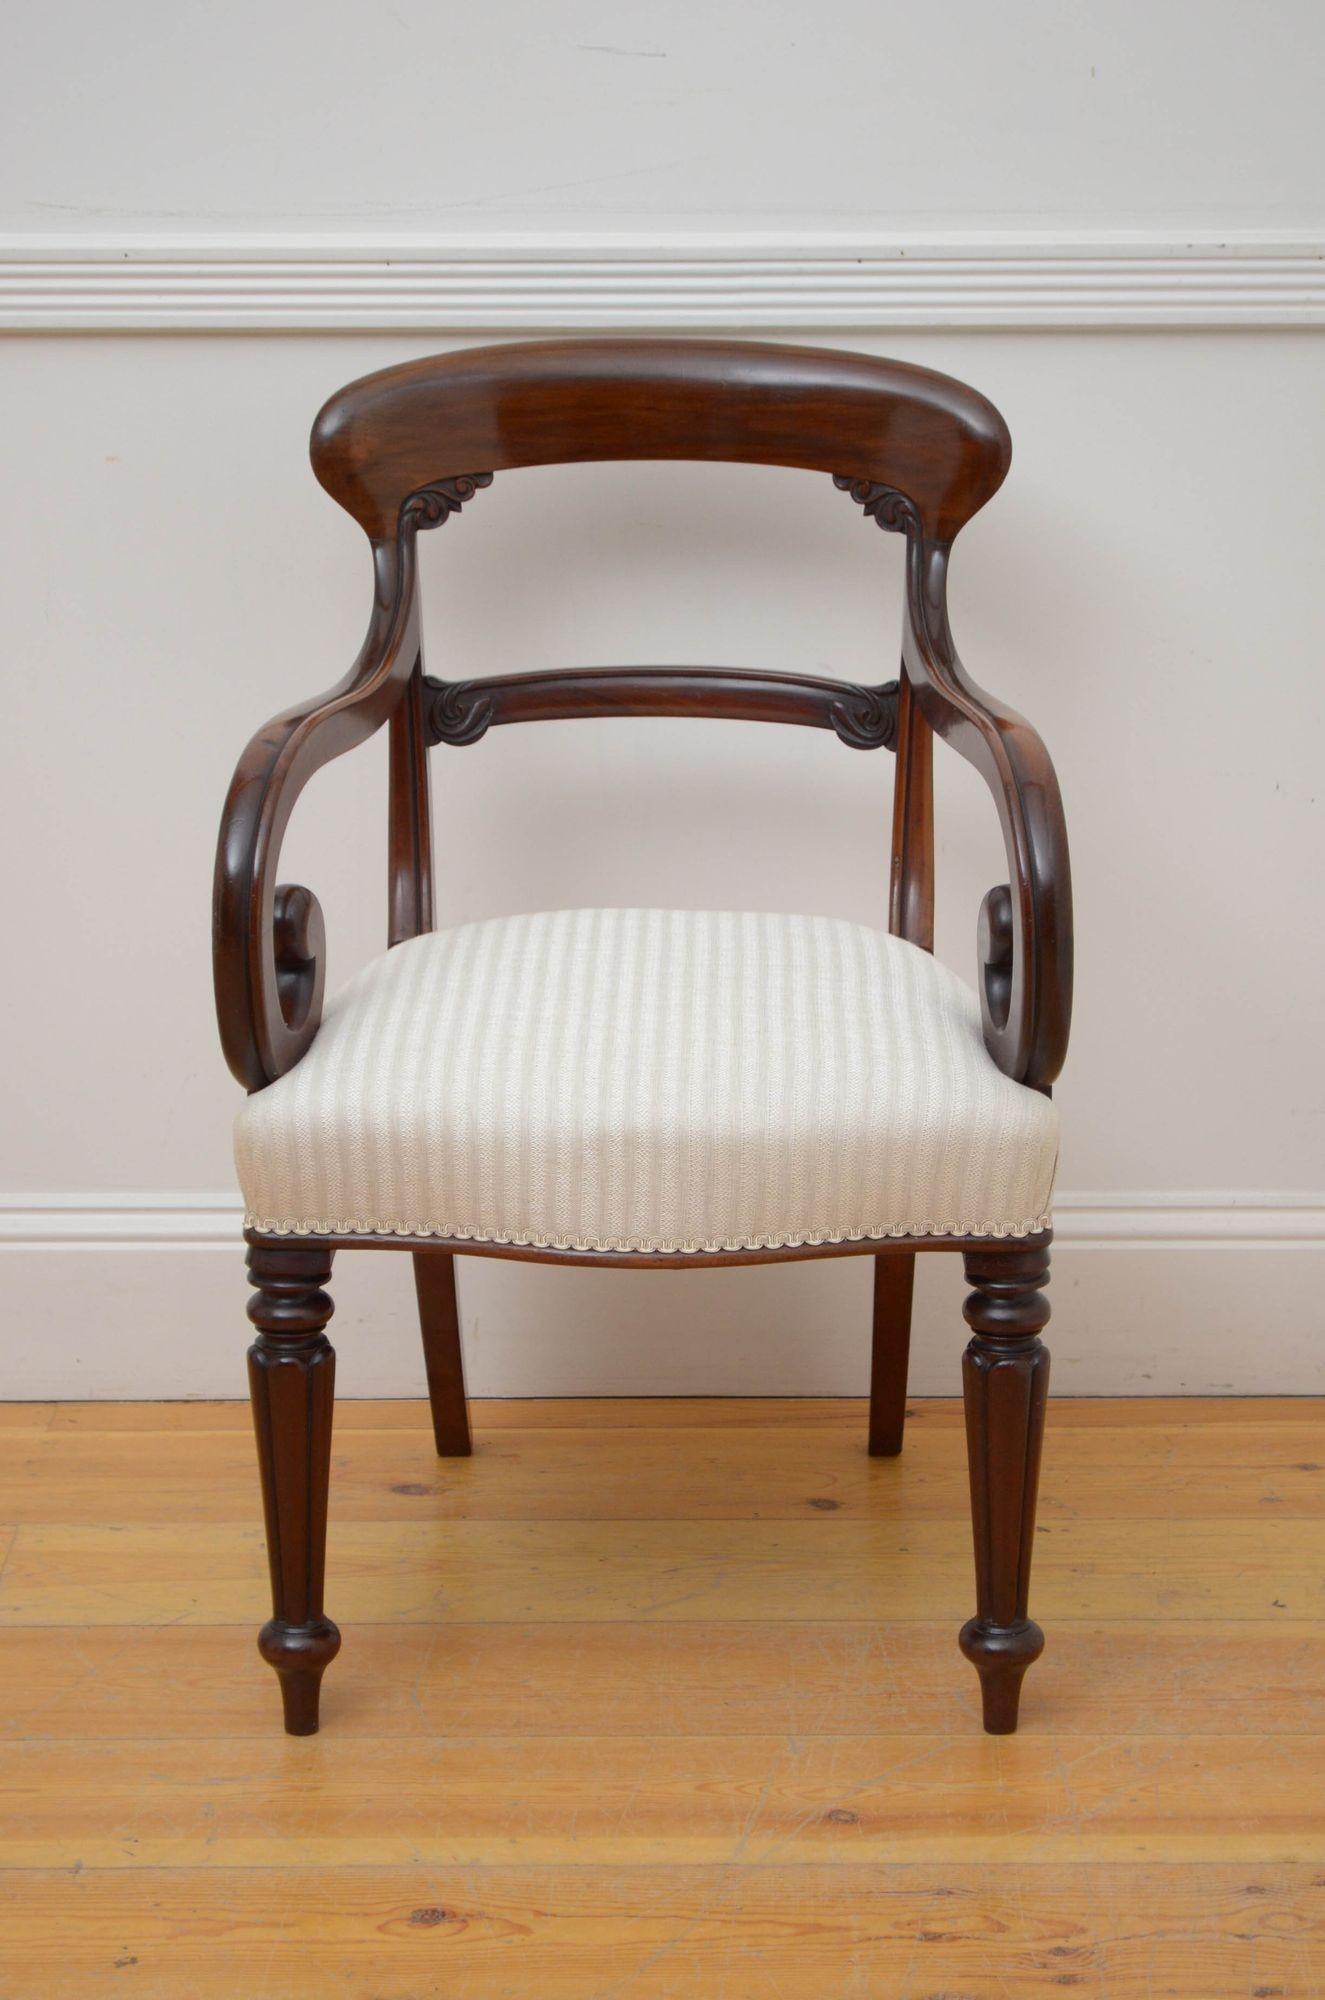 J030 Elegant William IV elbow chair in mahogany, having shaped top rail with decorative carved motifs below, carved mid rails, open scroll arms and generous seat, all standing in fluted legs. This antique armchairs is in home ready condition.